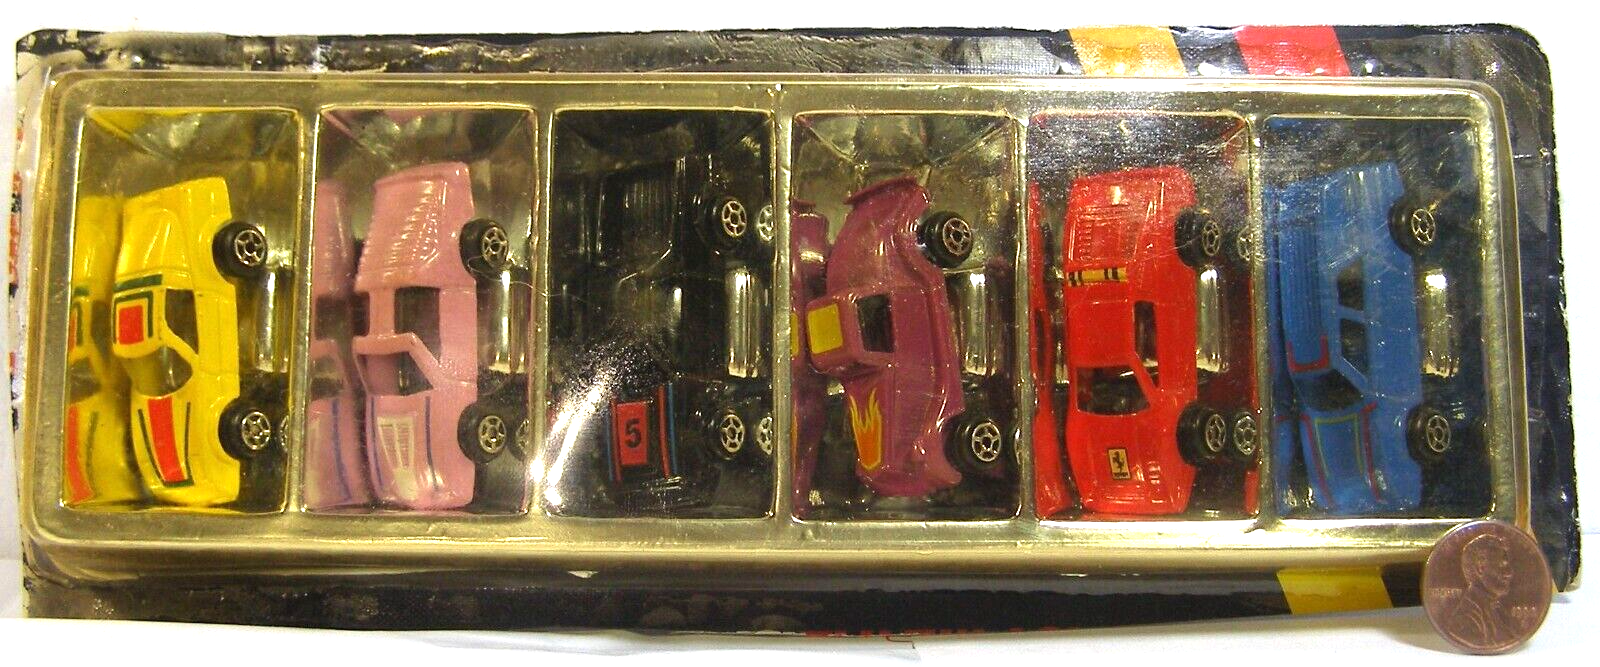 Tootsietoy Fast Pack Die Cast Cars 1989  6ct China   IHT - $7.95